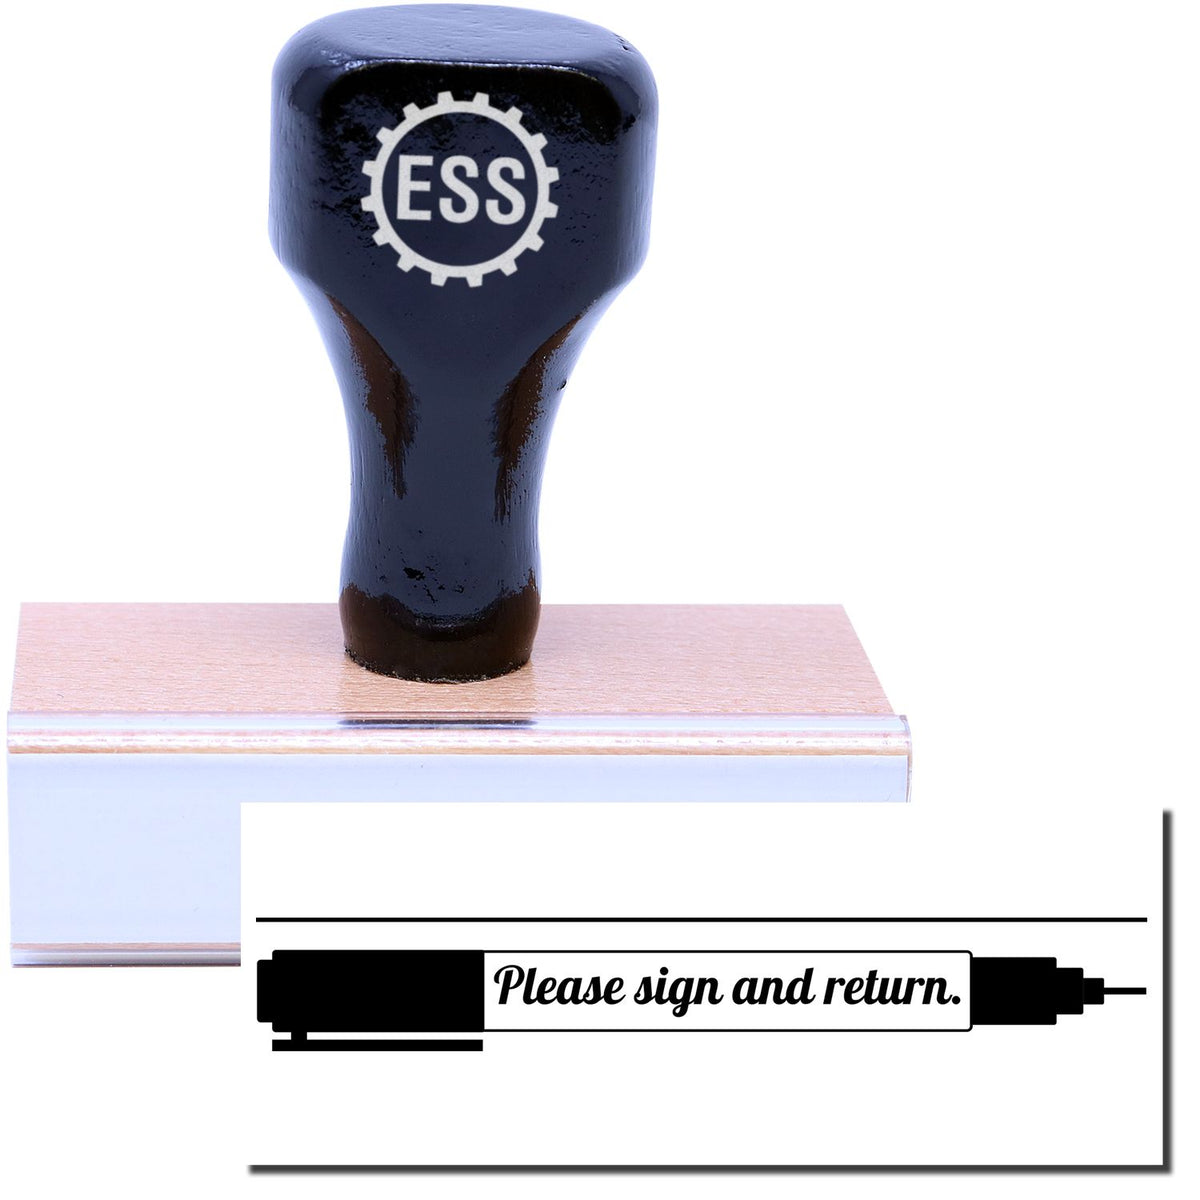 A stock office rubber stamp with a stamped image showing how the text &quot;Please sign and return.&quot; in a large cursive font with an image of a pen is displayed after stamping.